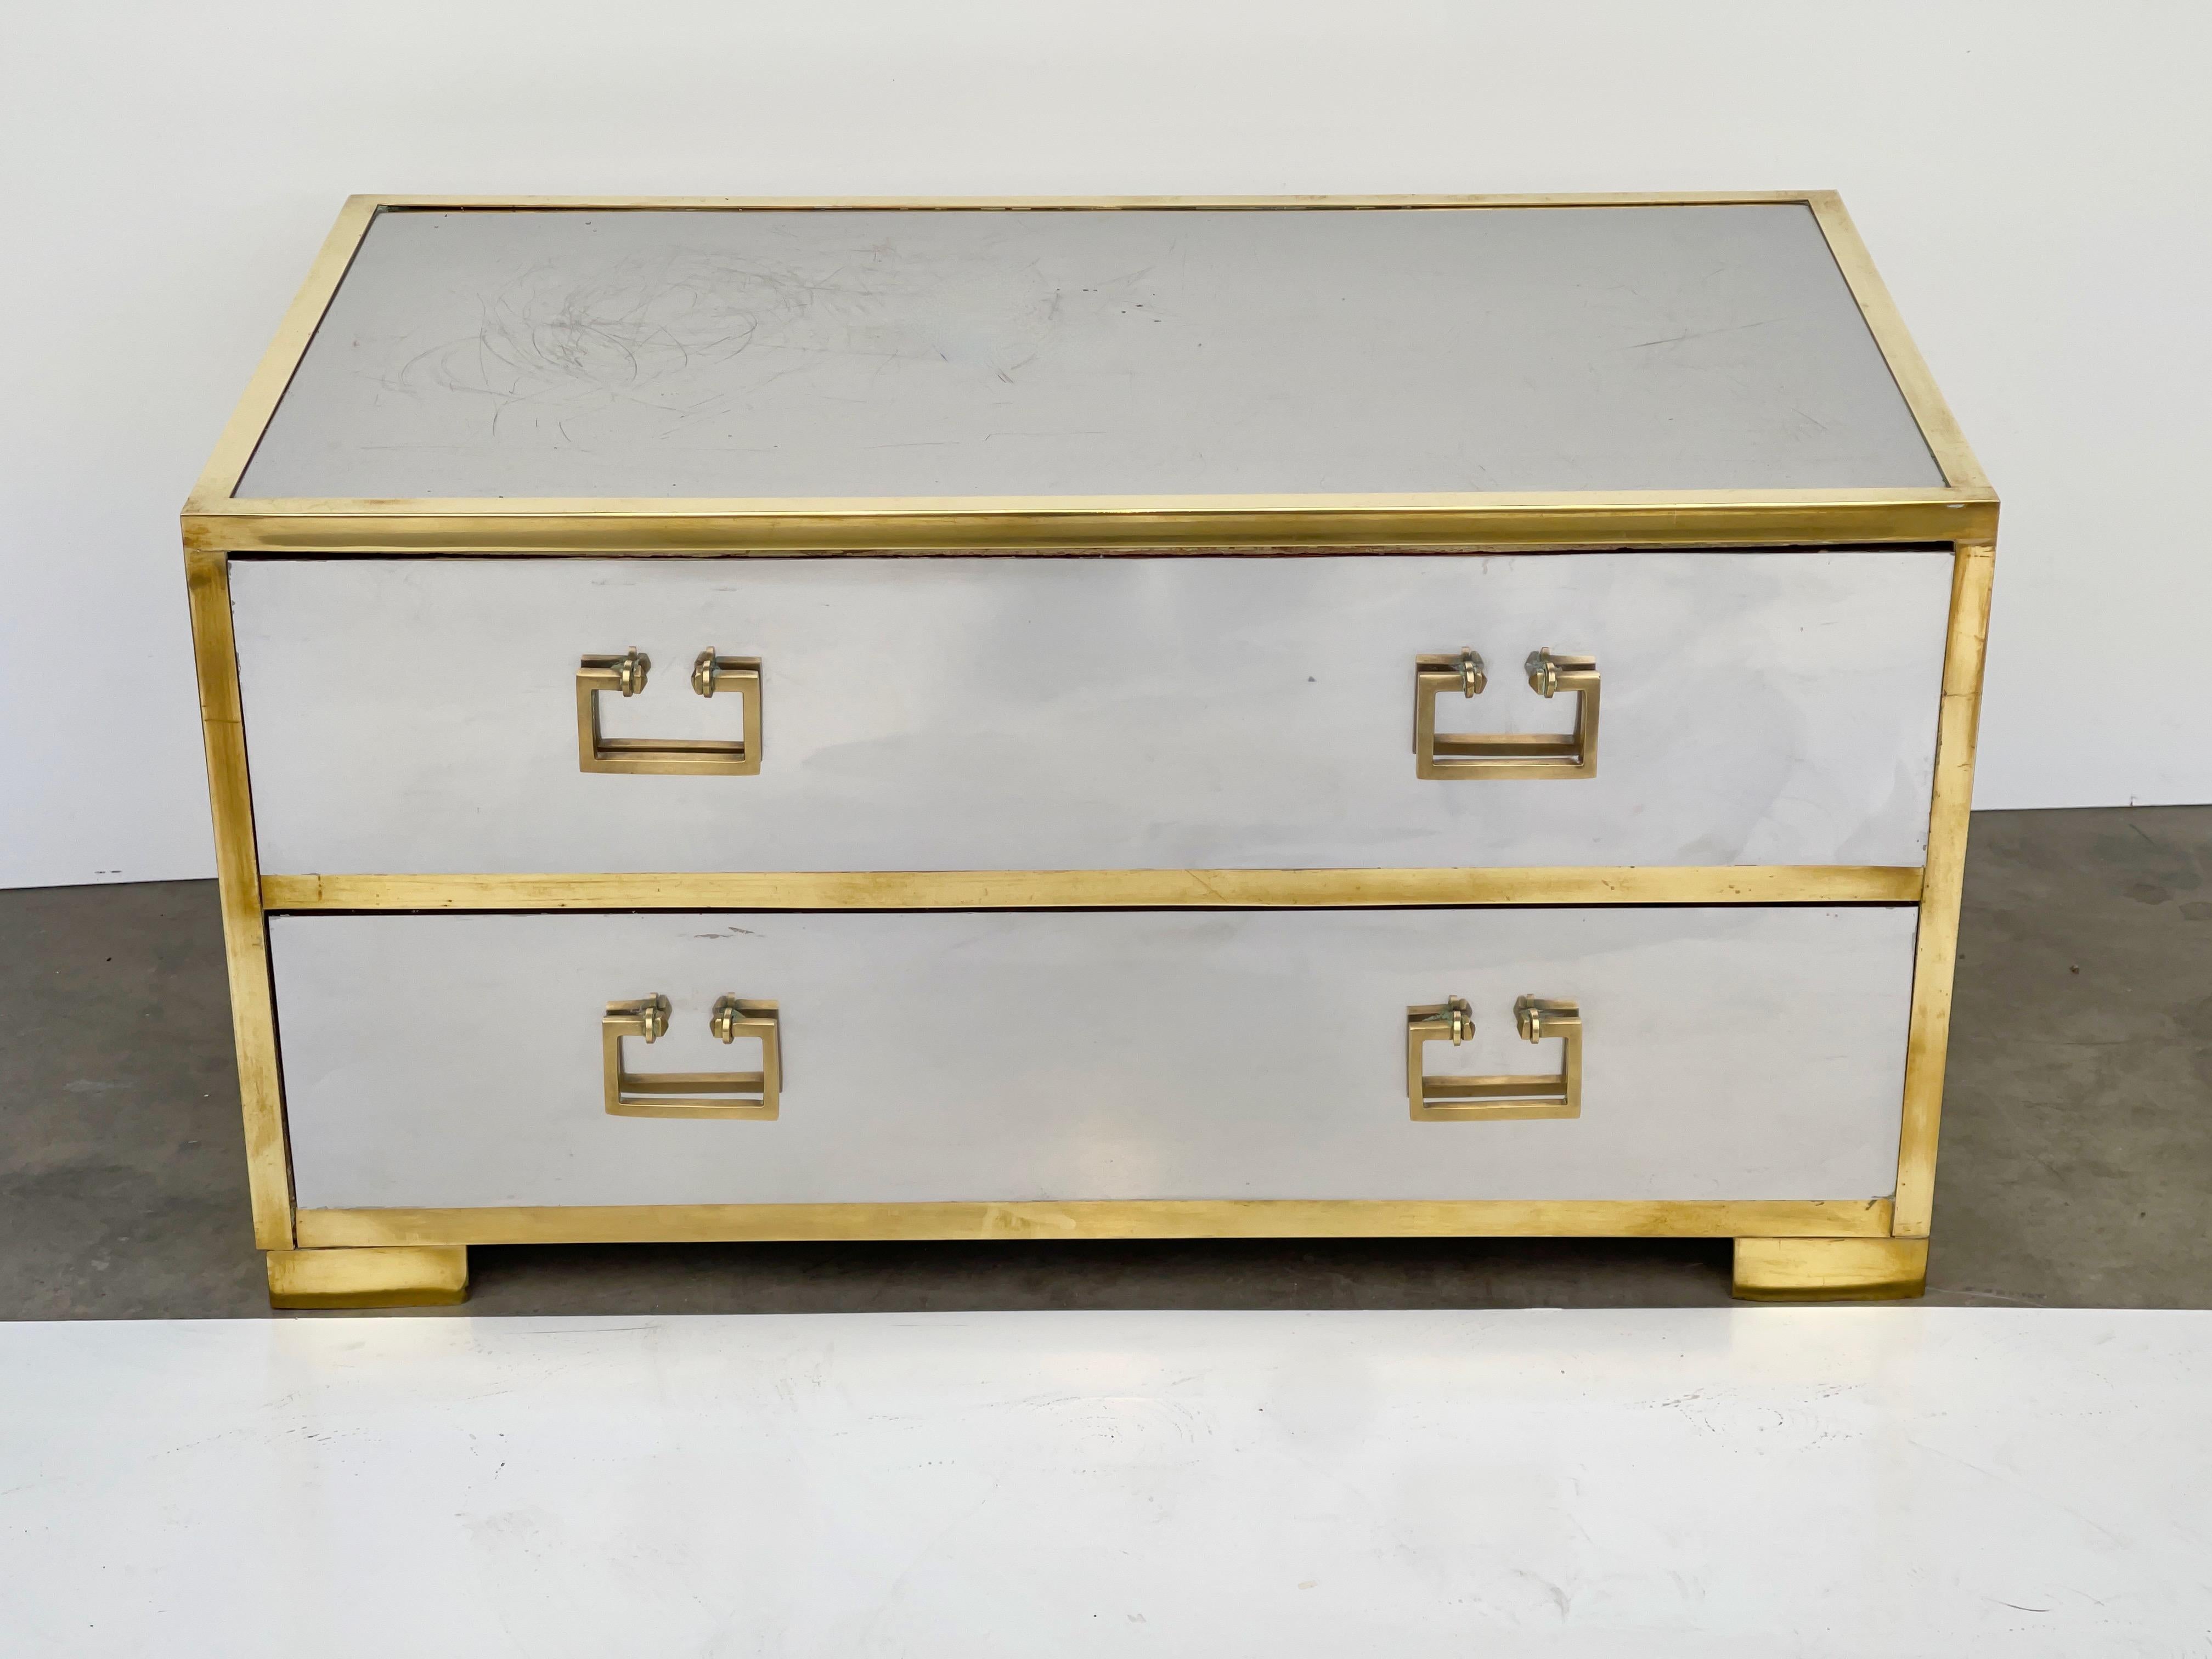 Sarreid of Spain geometric two-drawer footed low chest clad in mirror polished stainless steel and trimmed in brass with solid brass greek key style pulls and side handles. Vintage 1960's Hollywood Regency.
Wood drawers clean inside.
Finished on